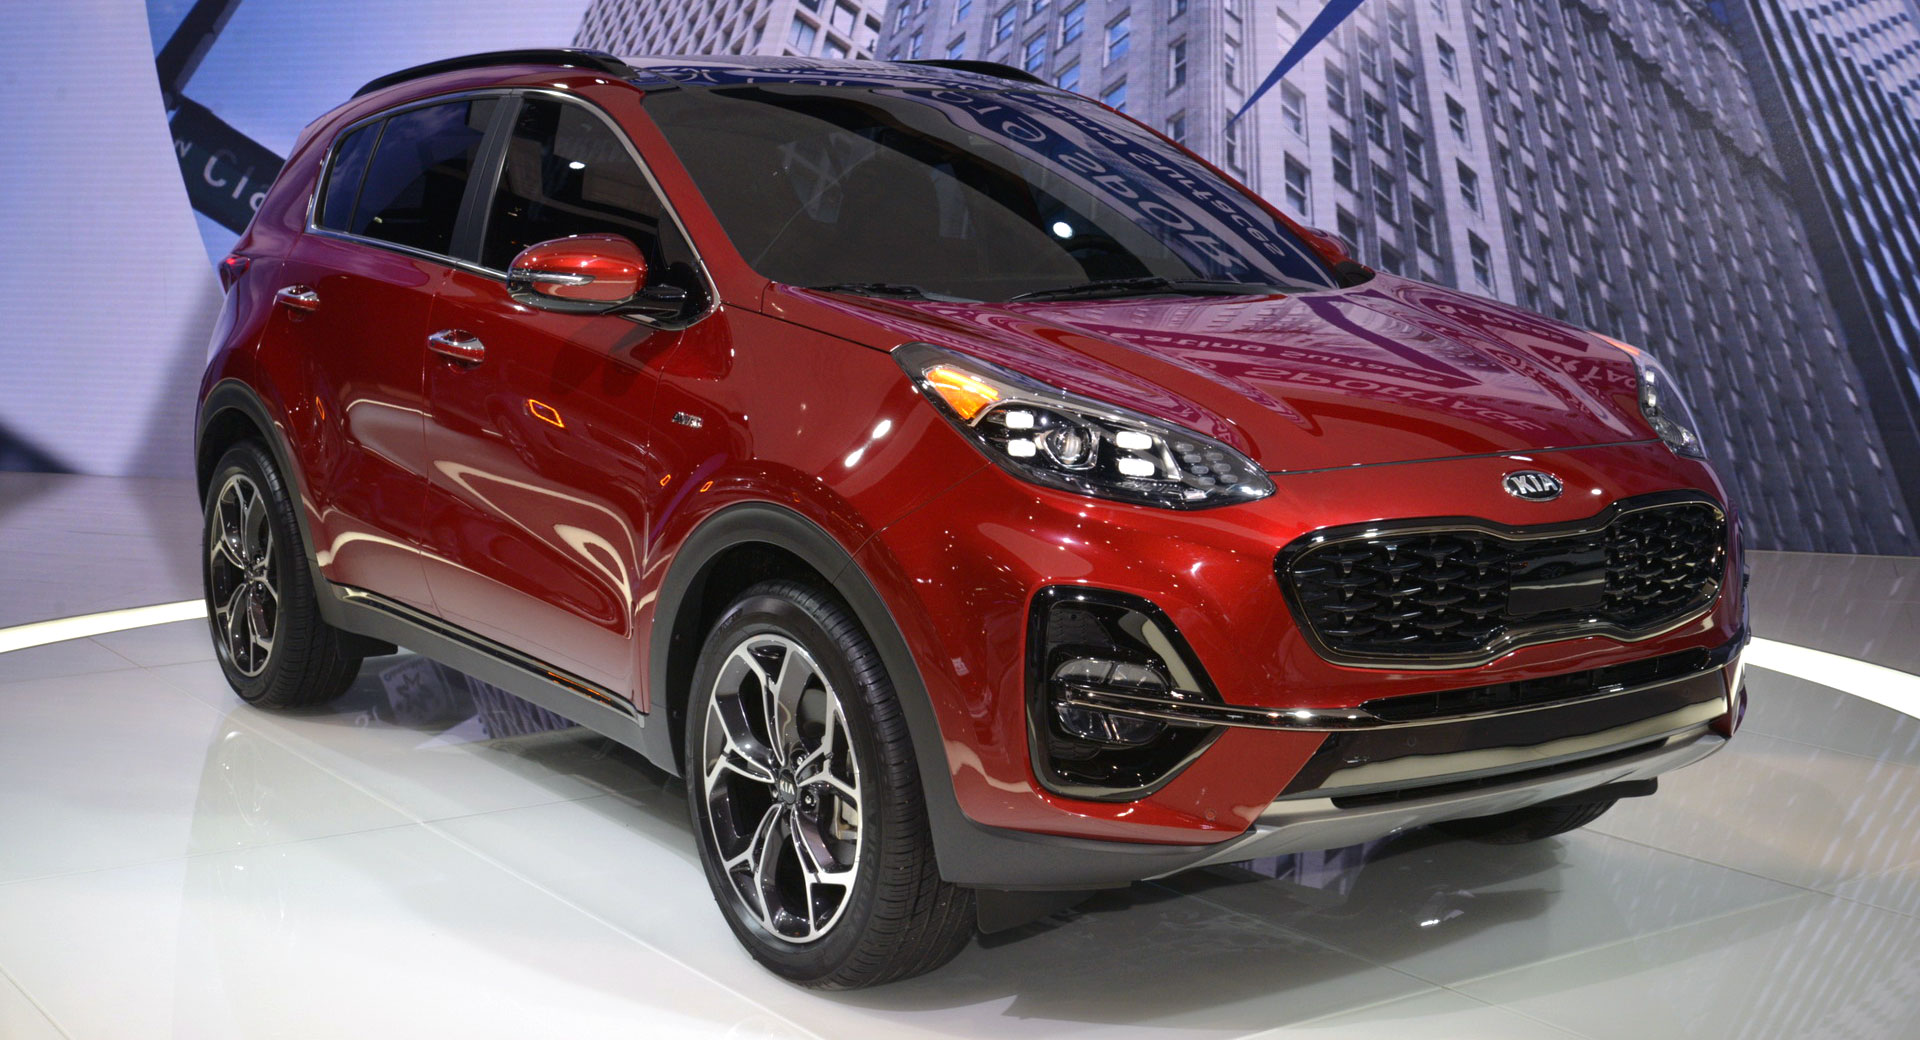 2020 Kia Sportage Gets A Light Makeover, New S Trim And Safety Kit ...